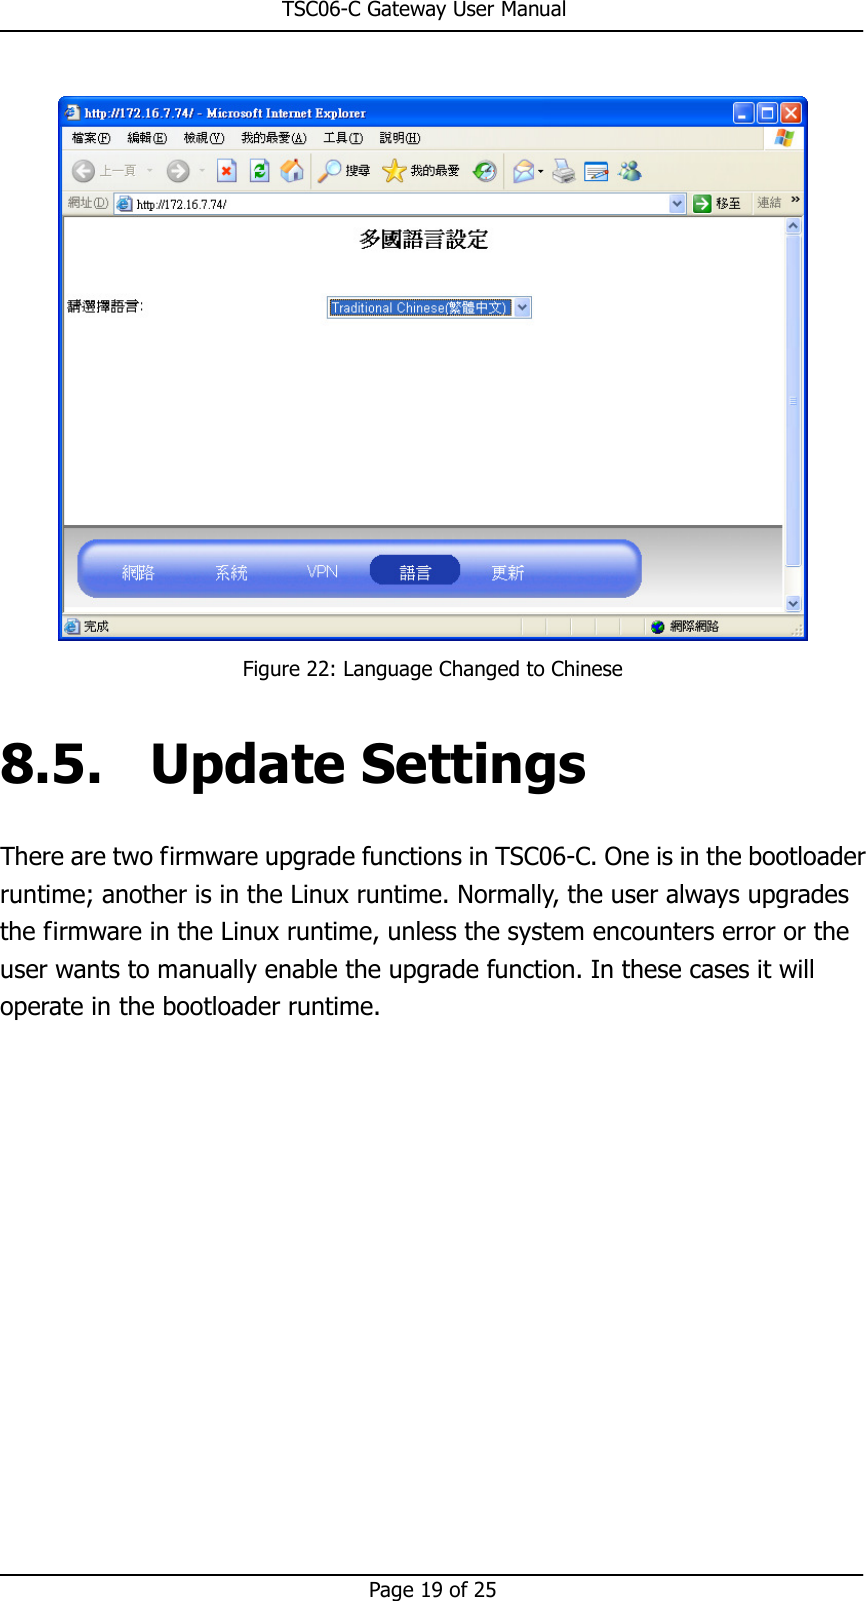                                                       TSC06-C Gateway User Manual   Page 19 of 25   Figure 22: Language Changed to Chinese 8.5. Update Settings There are two firmware upgrade functions in TSC06-C. One is in the bootloader runtime; another is in the Linux runtime. Normally, the user always upgrades the firmware in the Linux runtime, unless the system encounters error or the user wants to manually enable the upgrade function. In these cases it will operate in the bootloader runtime. 